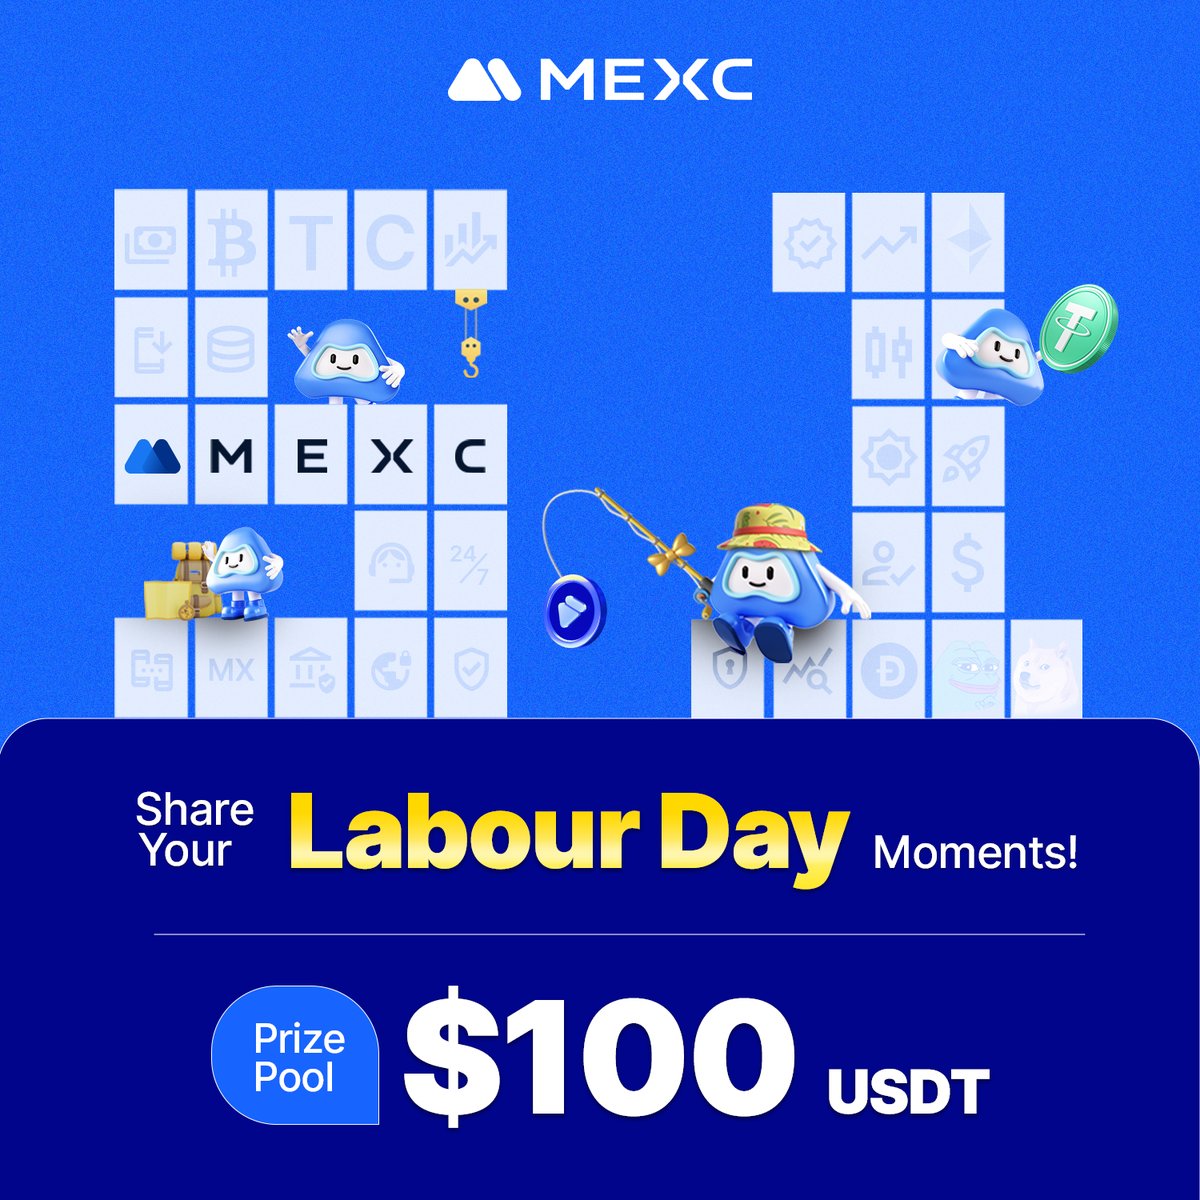 🎉Let’s celebrate Labour Day with $MEXC by sharing your special moments with us! Whether it's a well-earned break or a proud accomplishment, let's honor the spirit of labour together! 1️⃣Follow @MEXC_Official, 💙 and QT 2️⃣Enter now to share 100 USDT: forms.gle/yyq9BuZd17gFyo…